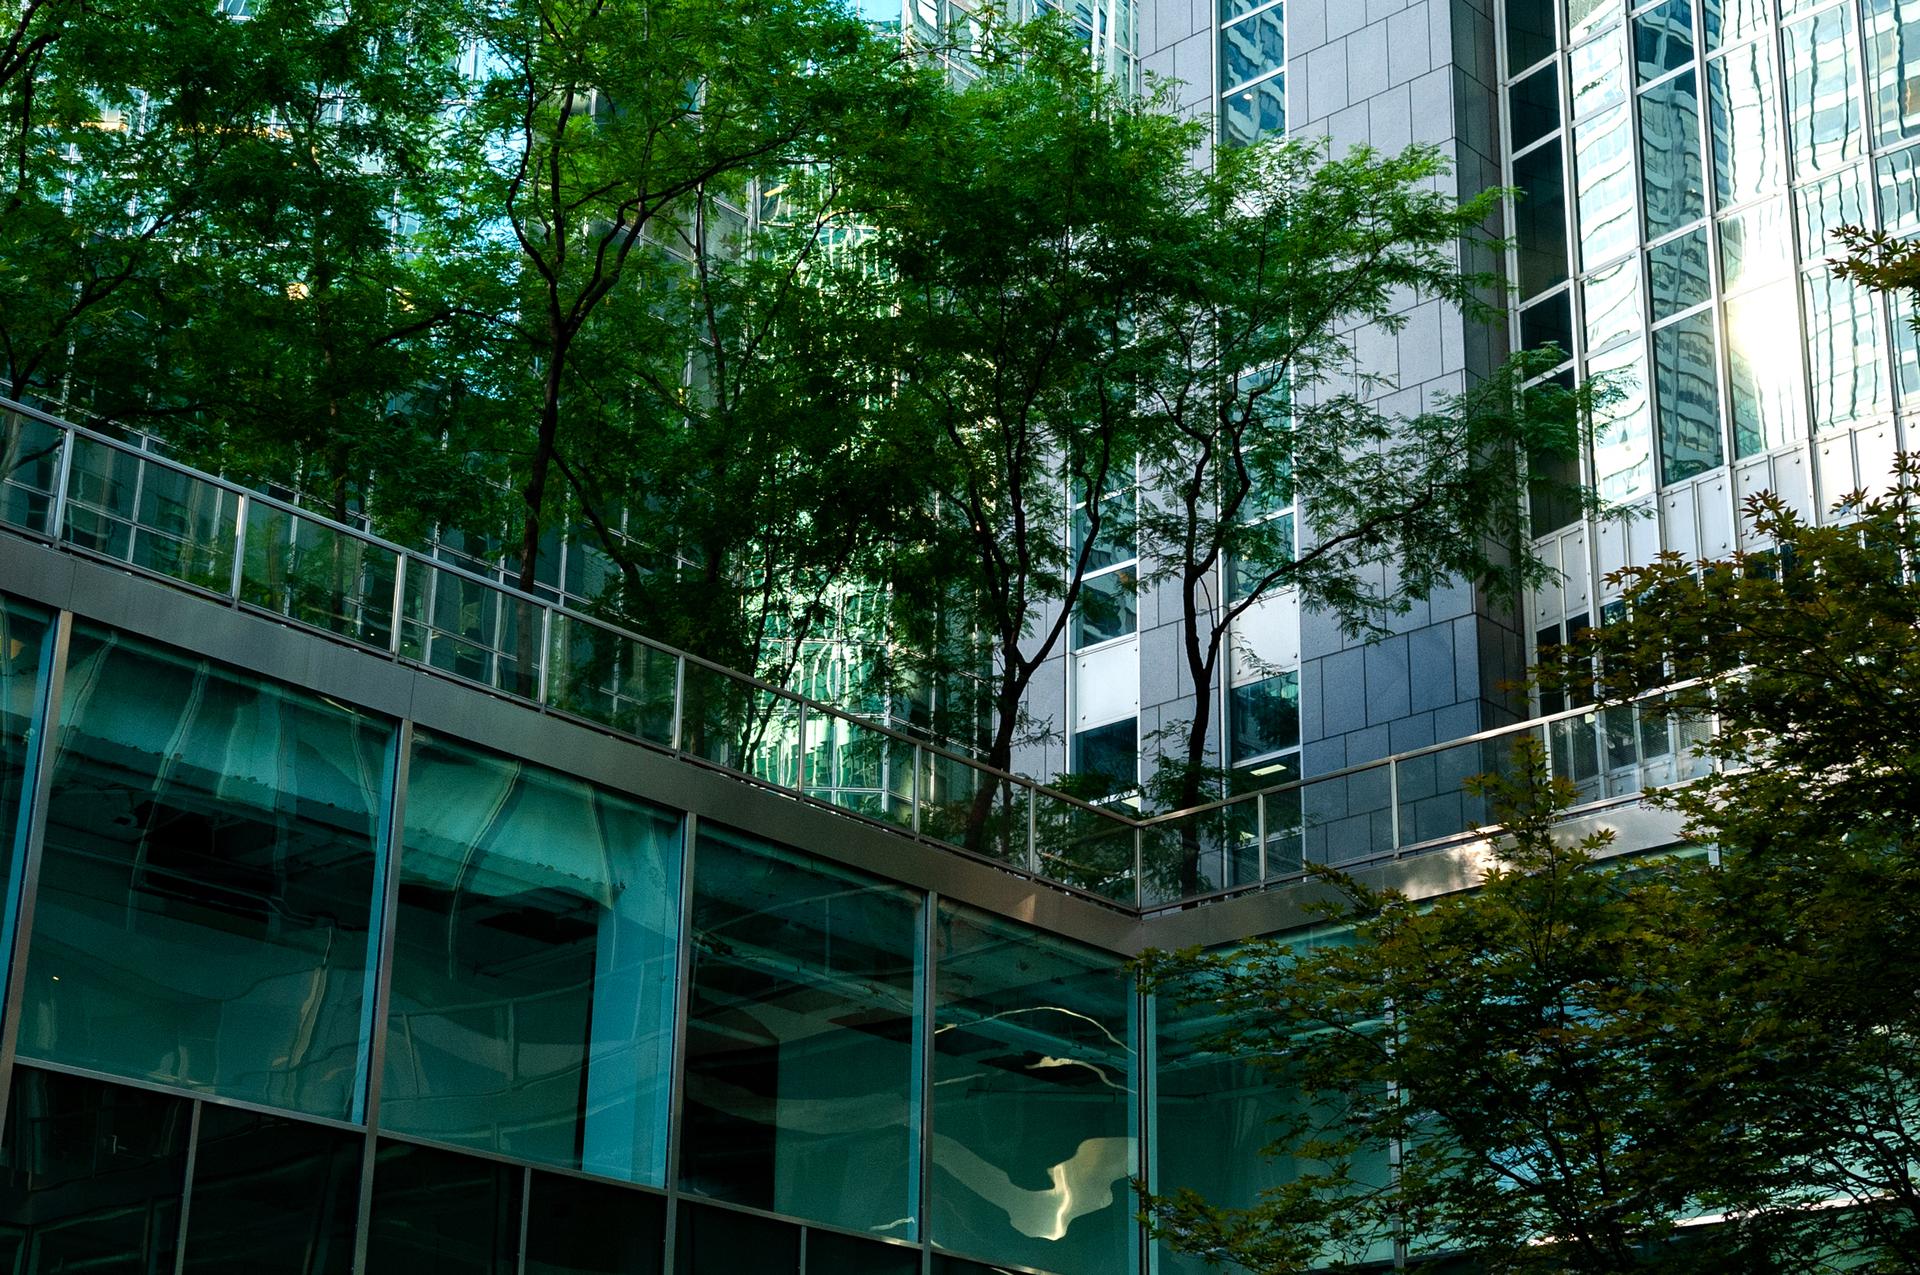 The facade of the Lever House.